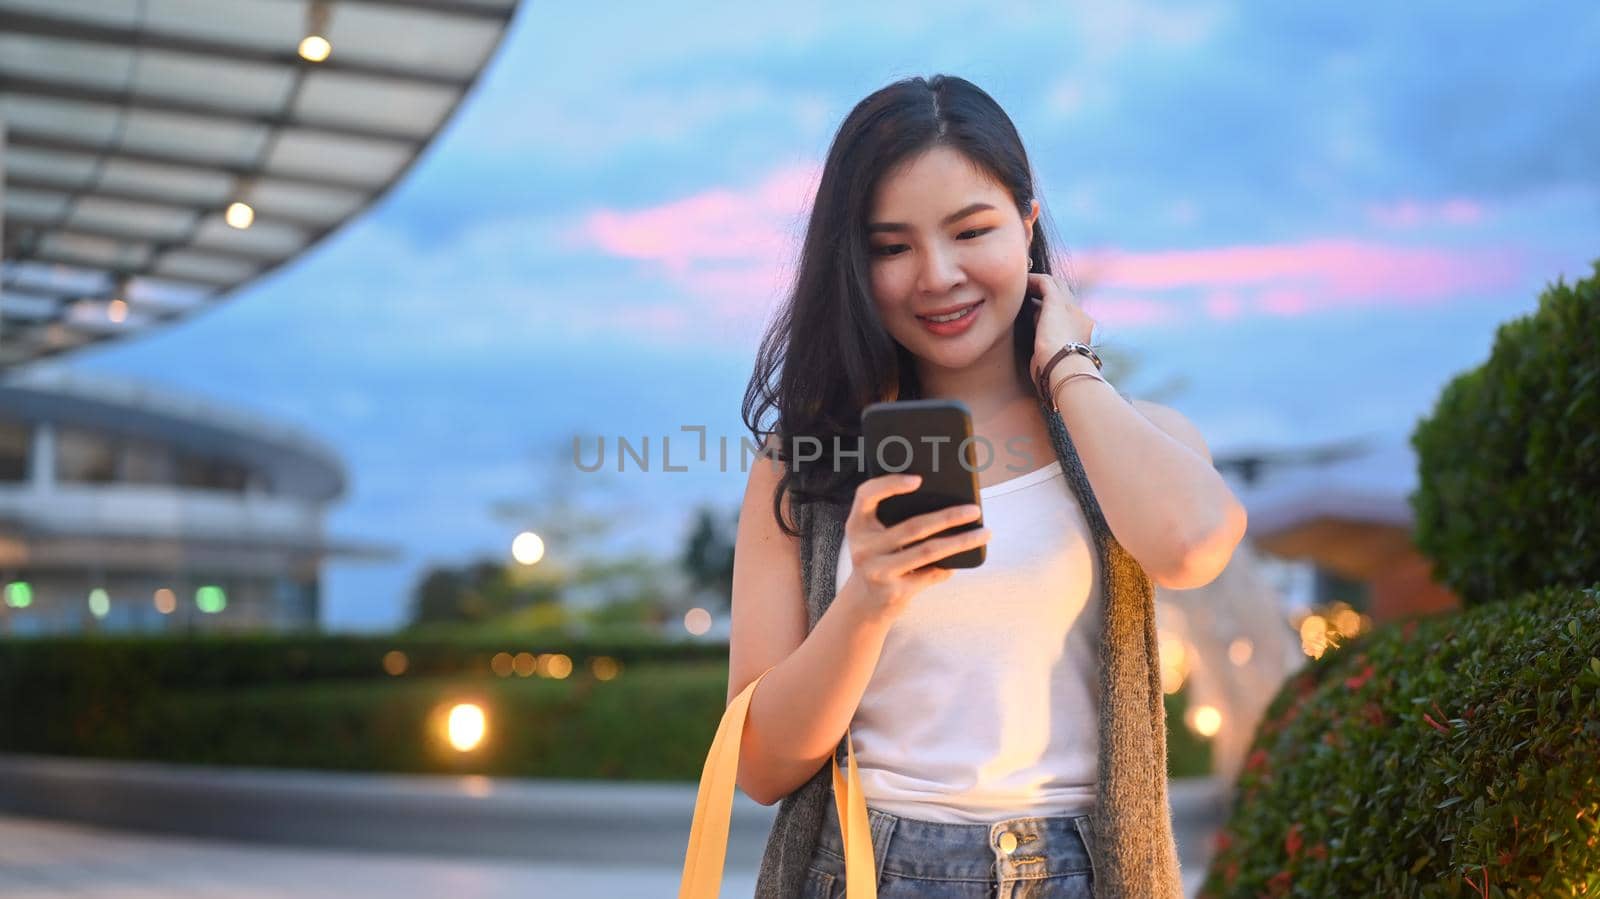 Trendy asian woman using smart phone walking on evening city streets with beautiful evening sky in background.